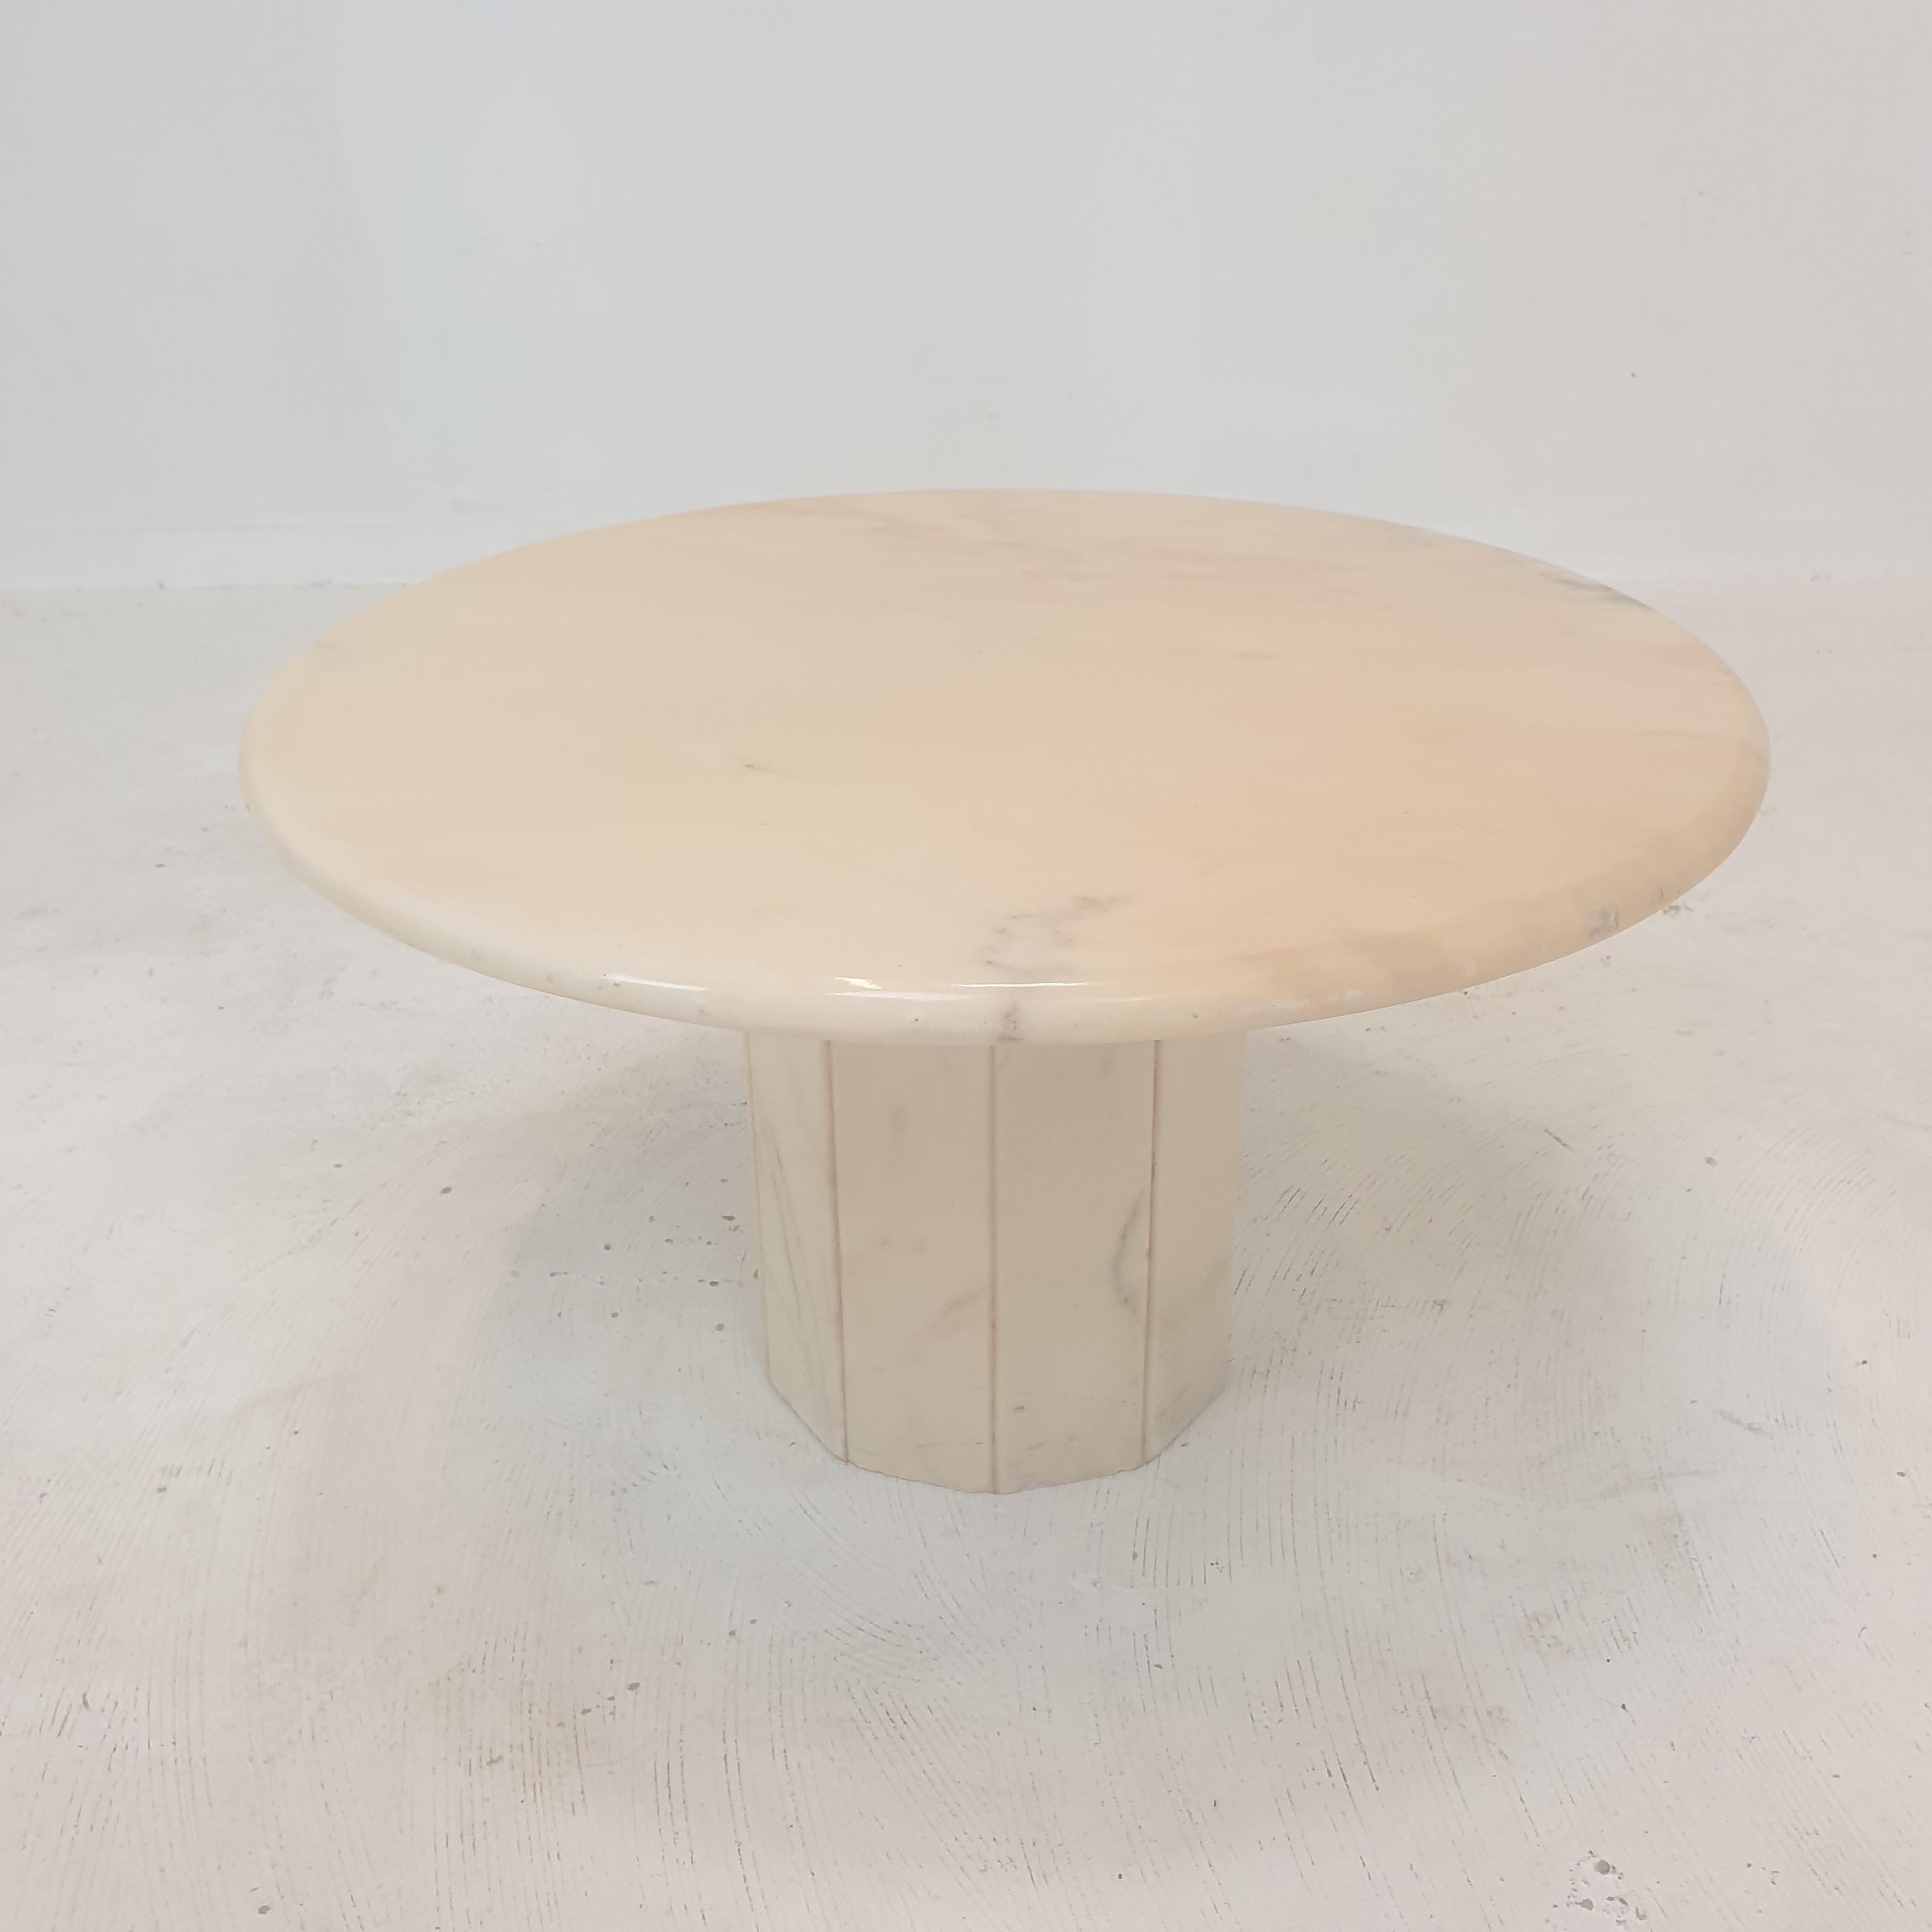 Set of 3 Italian Marble Side Tables, 1970s For Sale 10